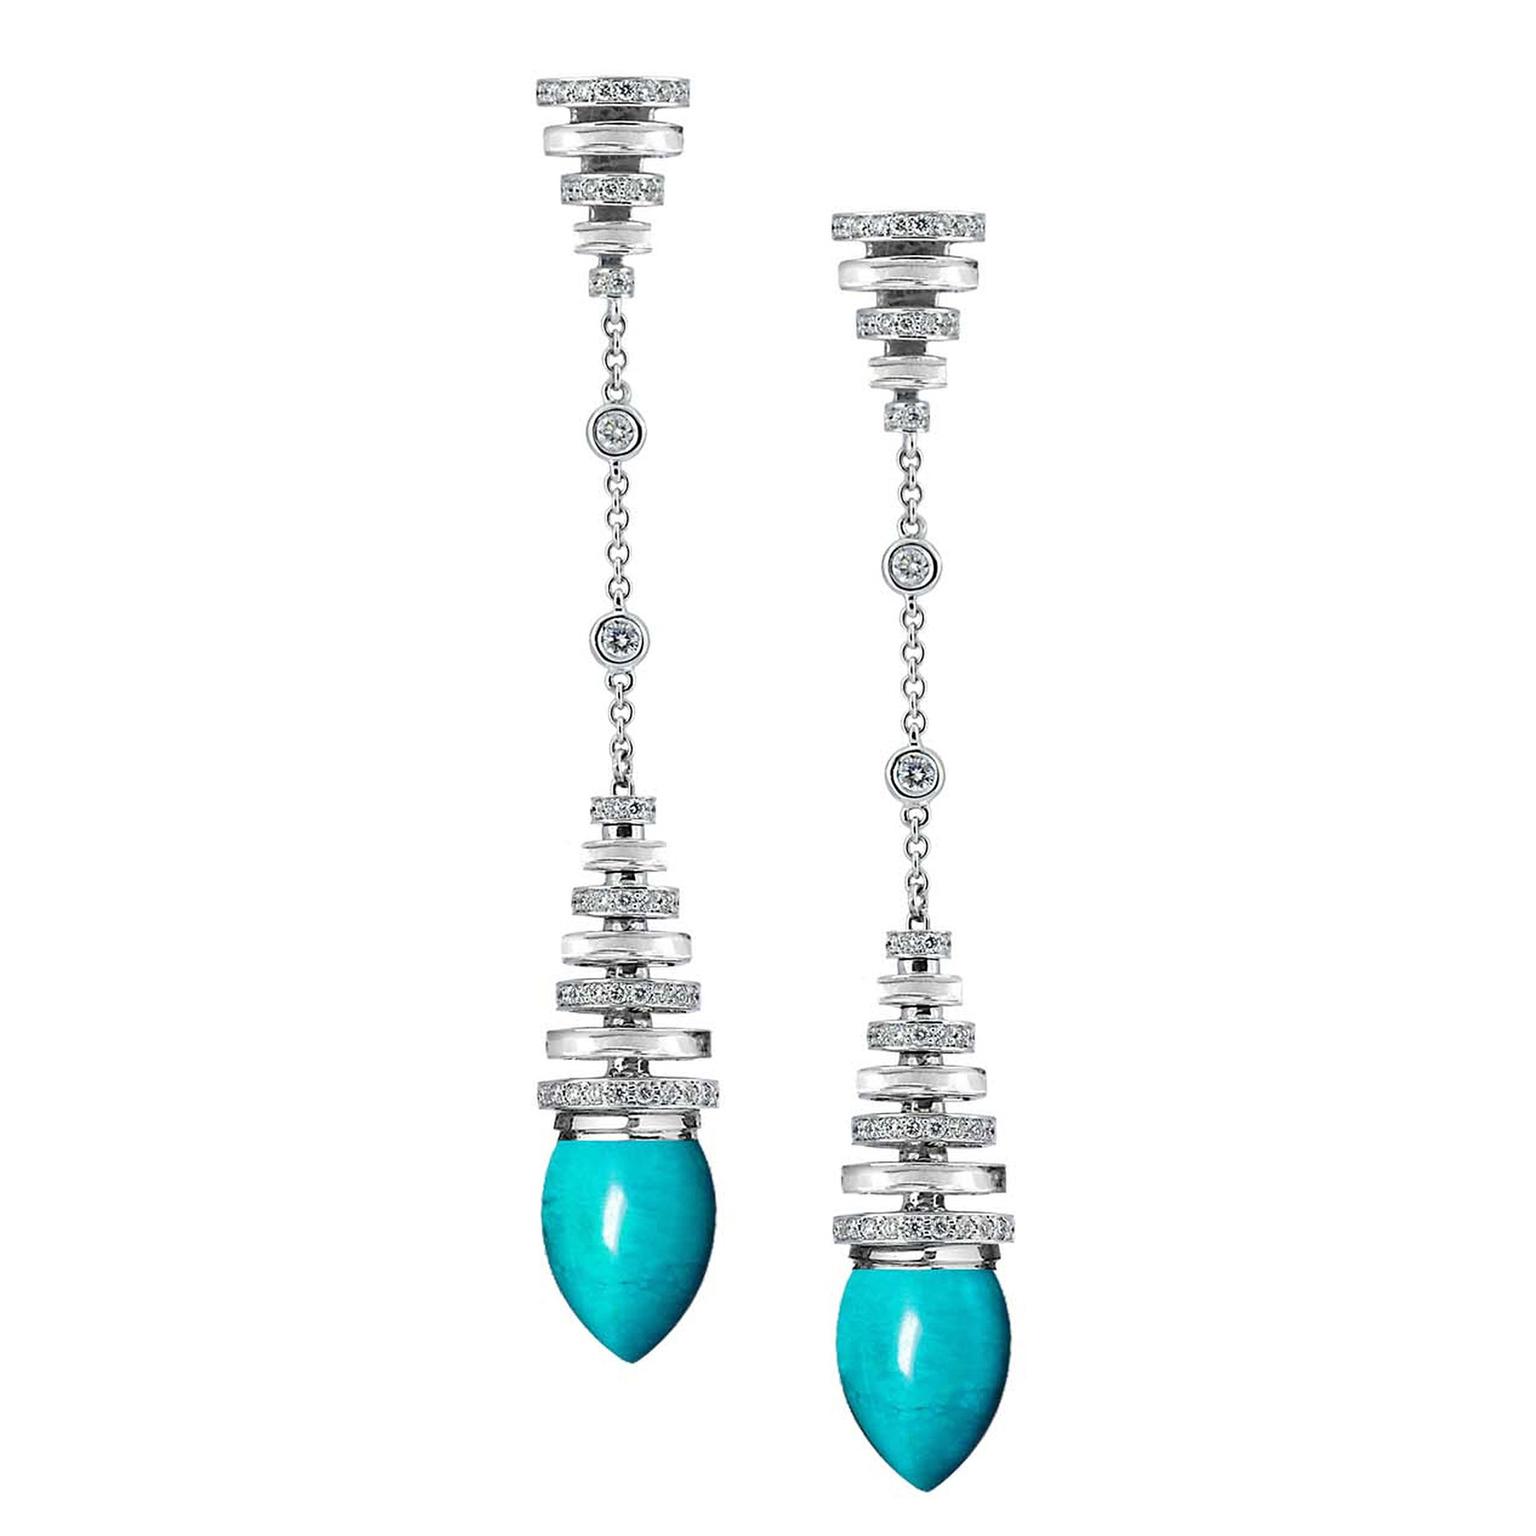 Avakian turquoise earrings in white gold with diamonds, from the Riviera collection.